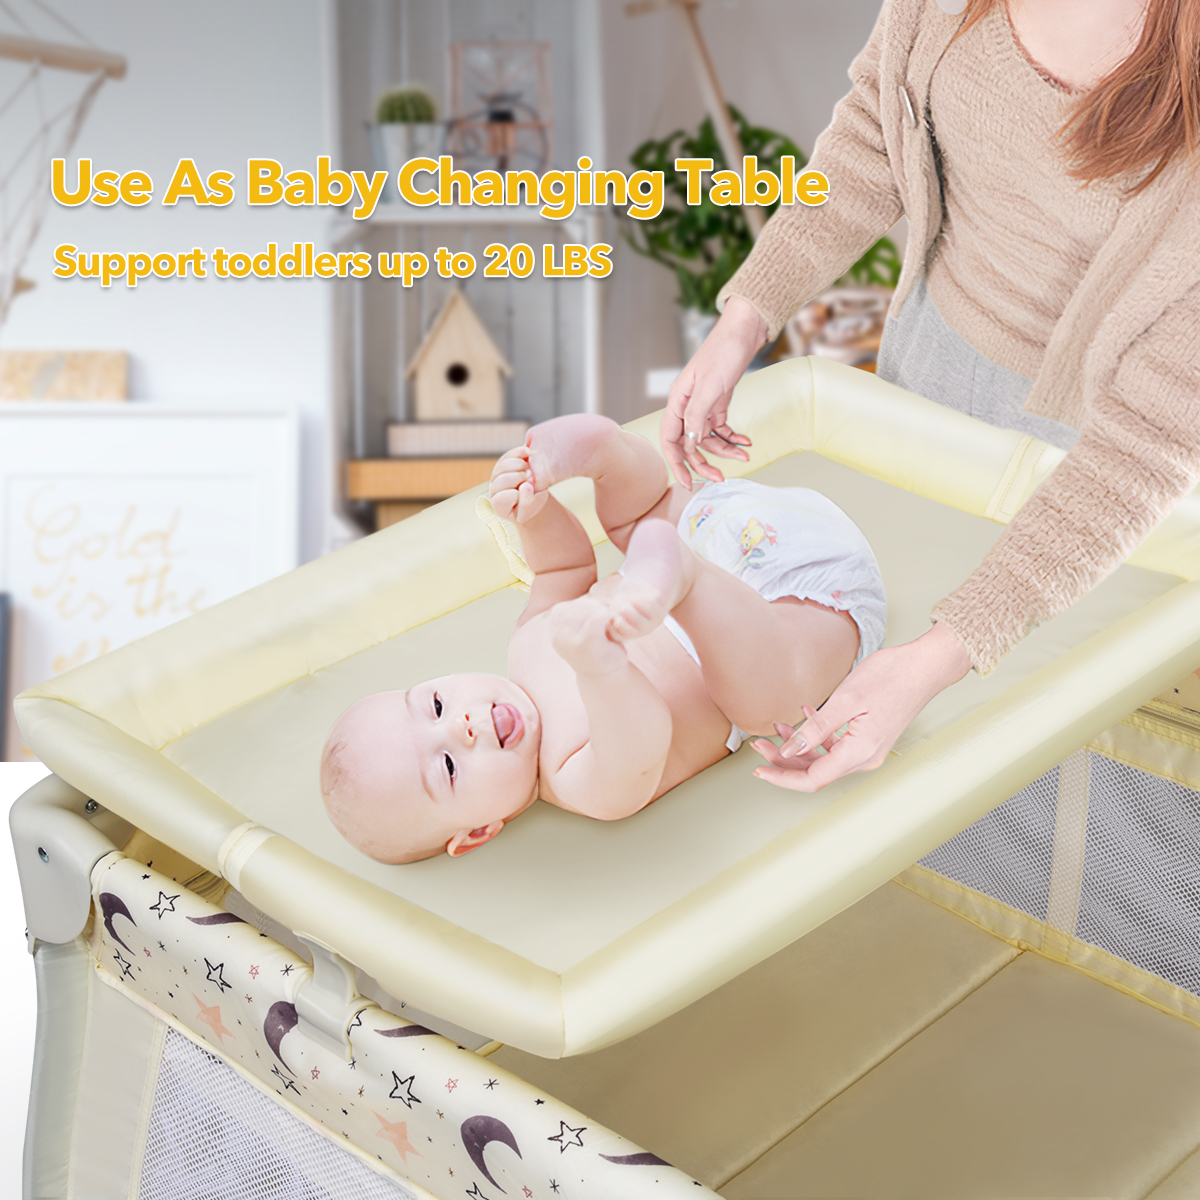 Topbuy 3 in 1 Foldable Baby Playard Changing Table& Nursery Center with Bassinet Beige/Gray/Pink